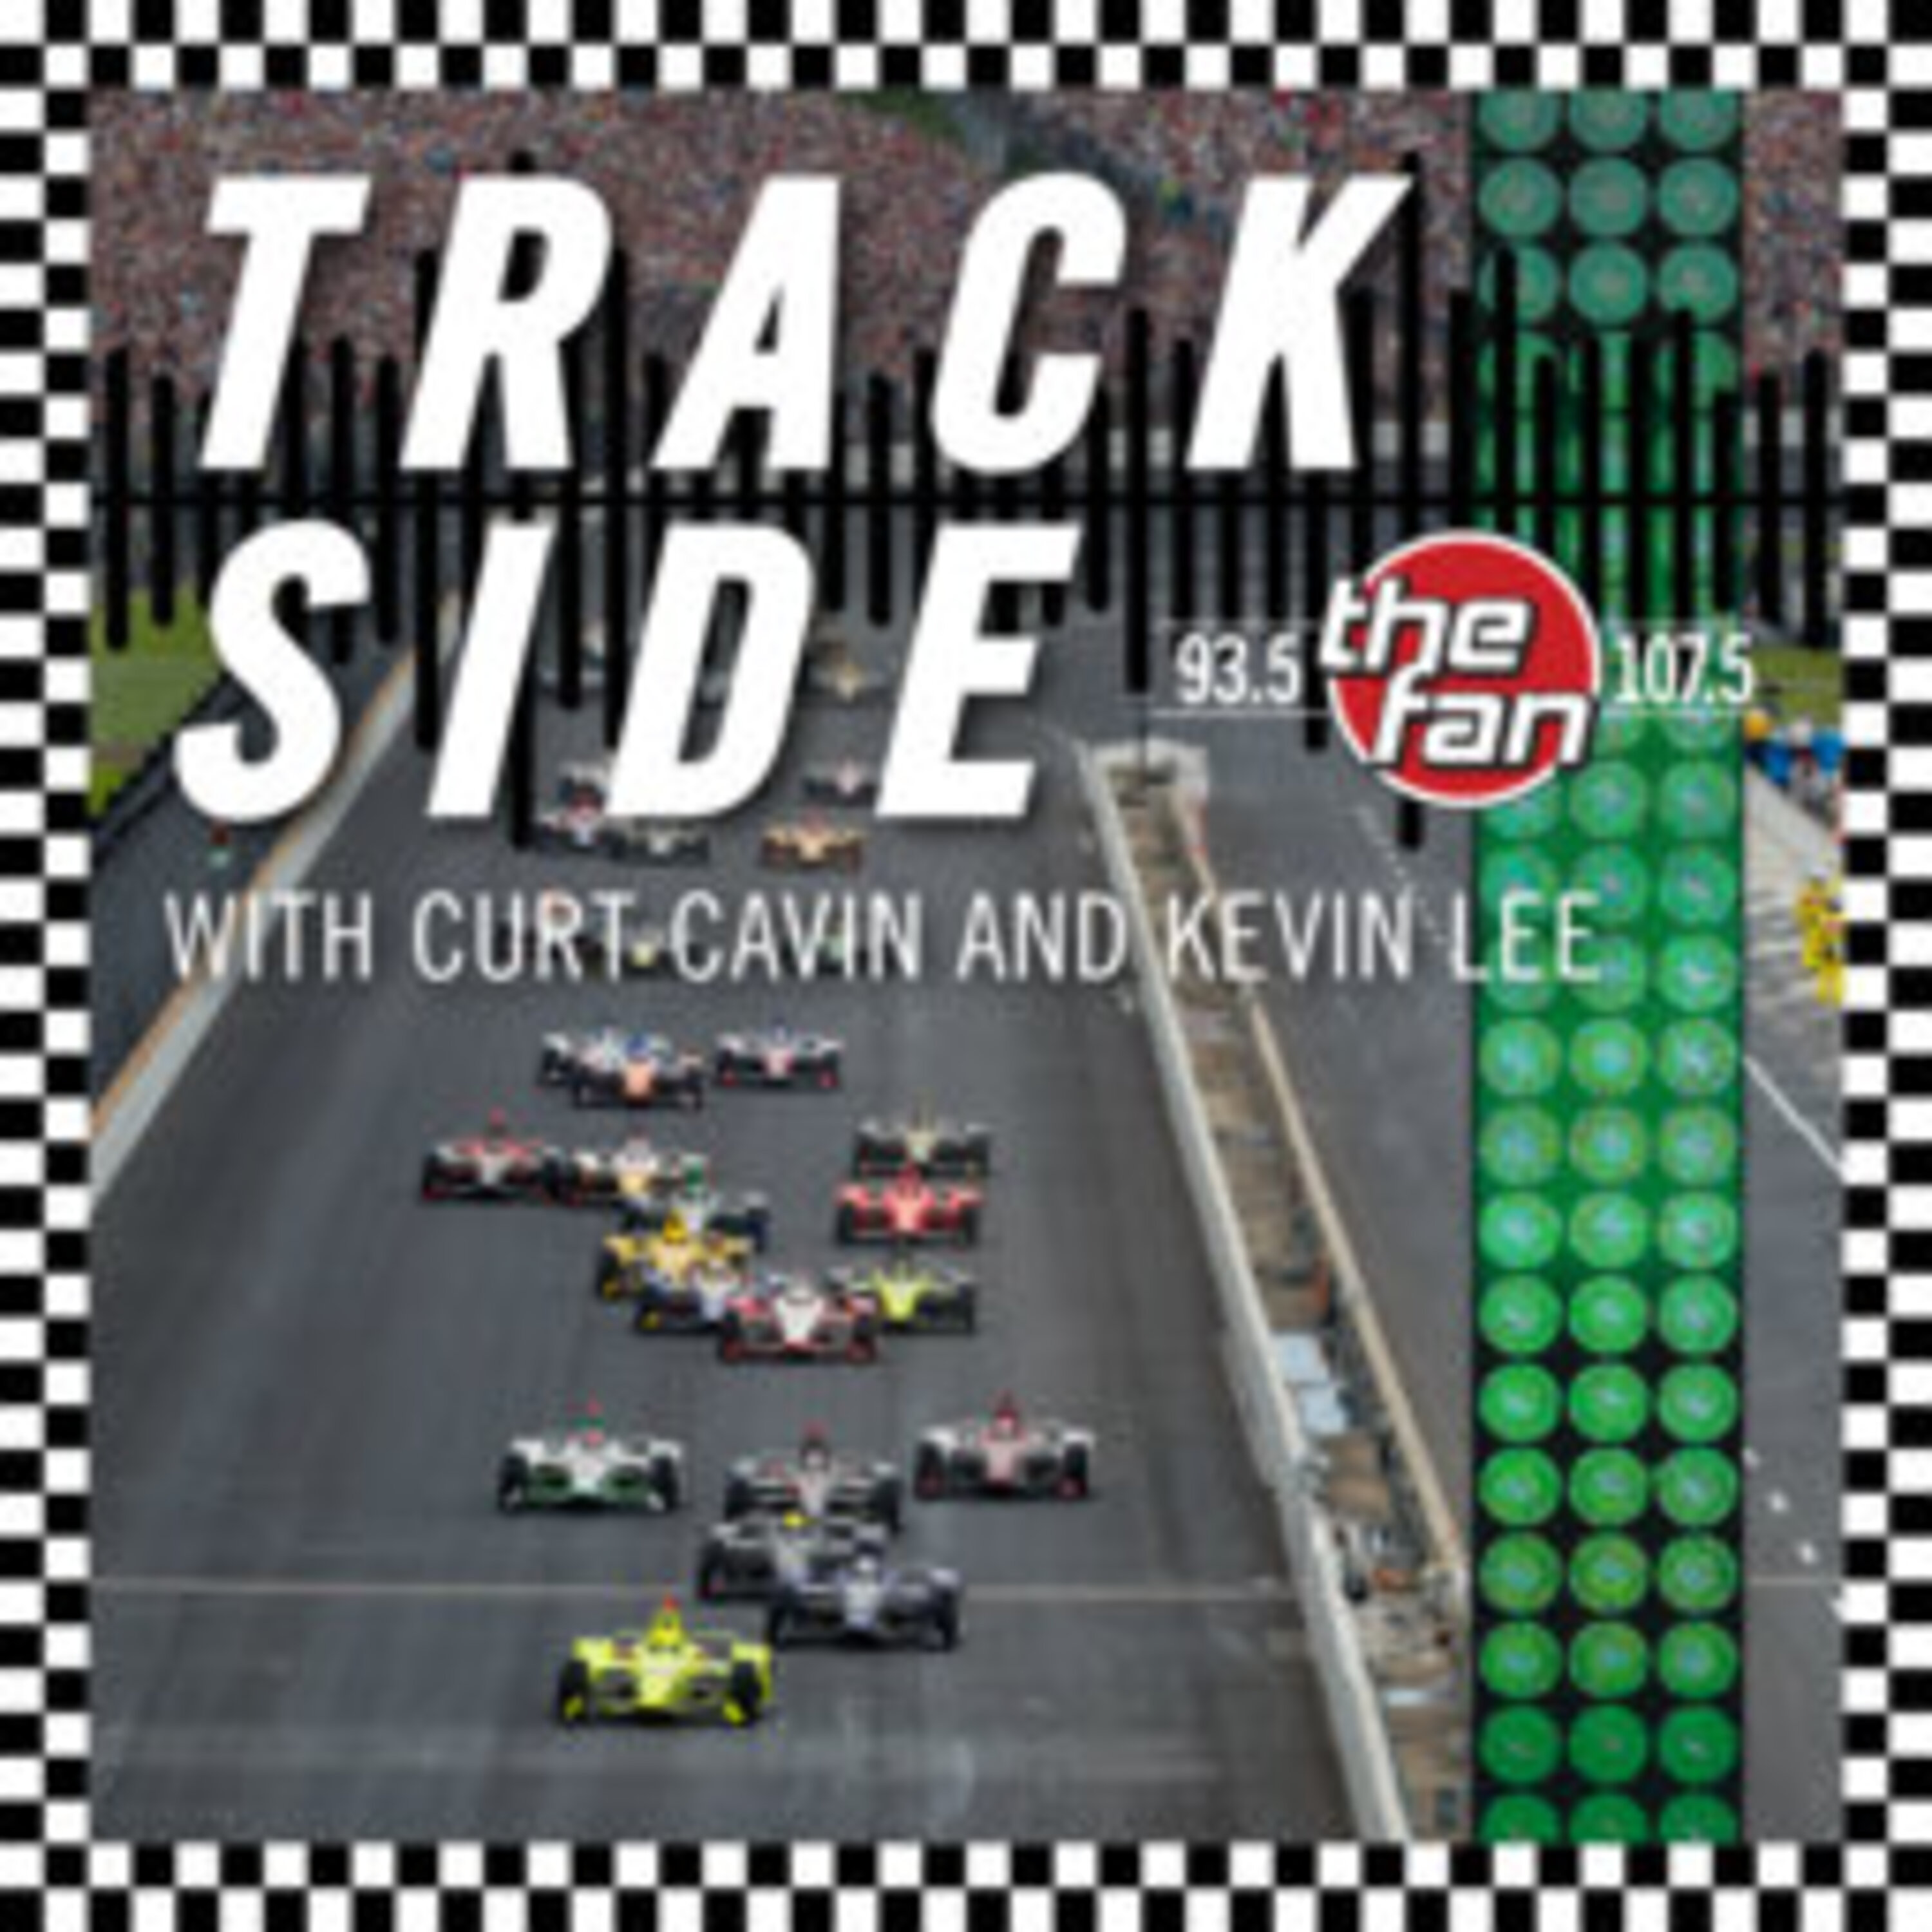 Kevin and Curt Talk About Sting Ray Robb Signing to A.J. Foyt Enterprises and More!